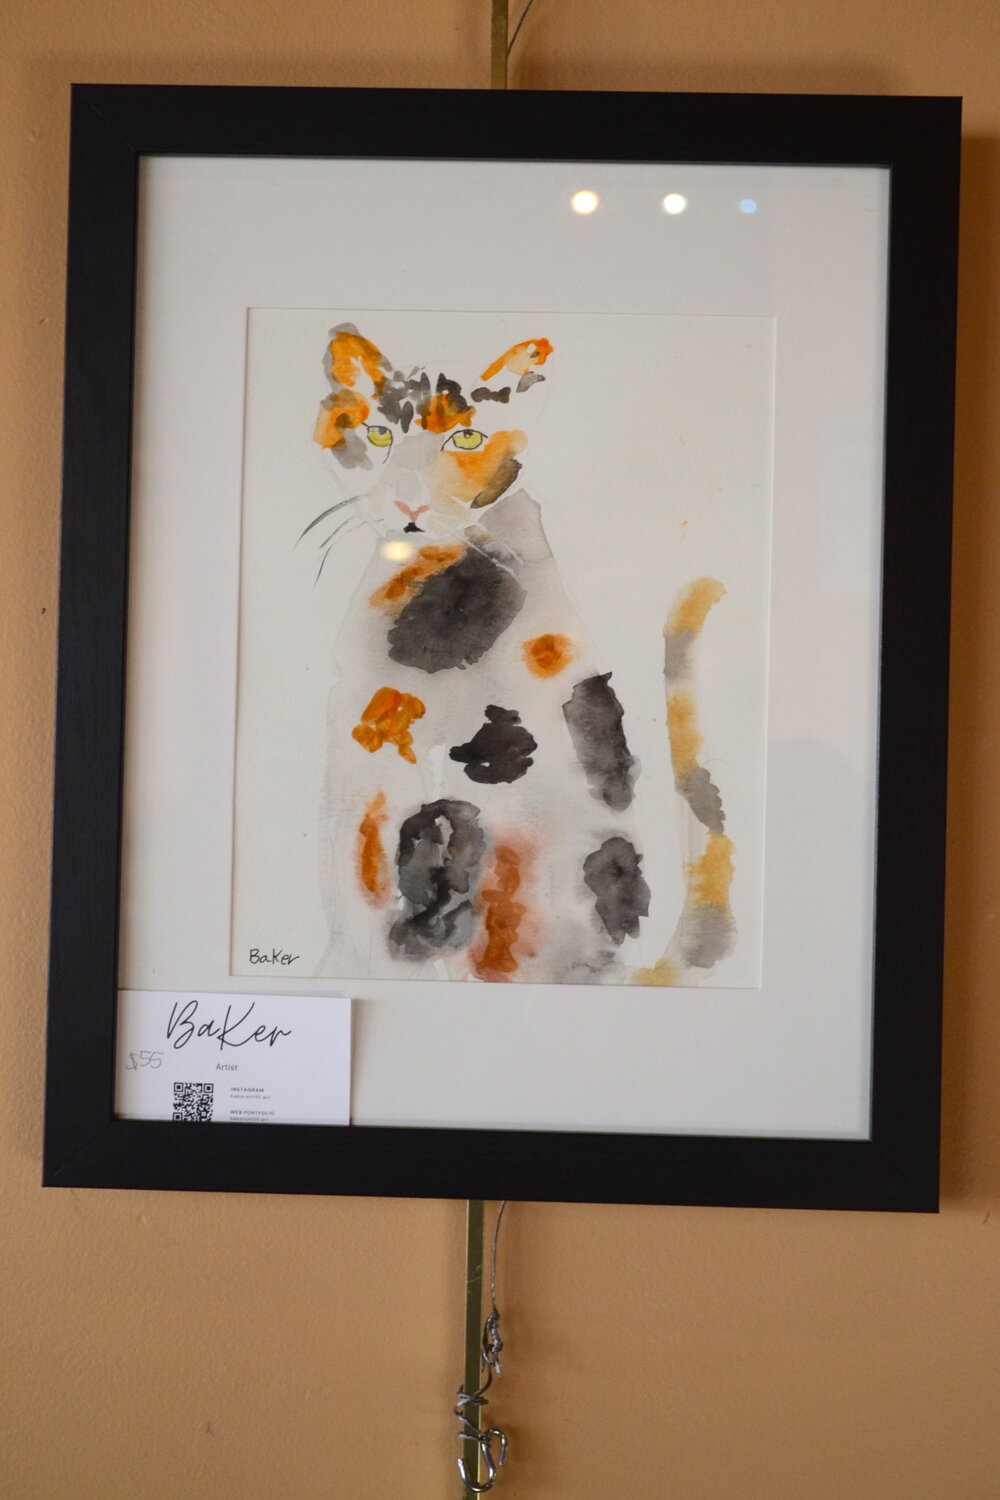 A calico cat shows Baker’s use of colors and negative space.